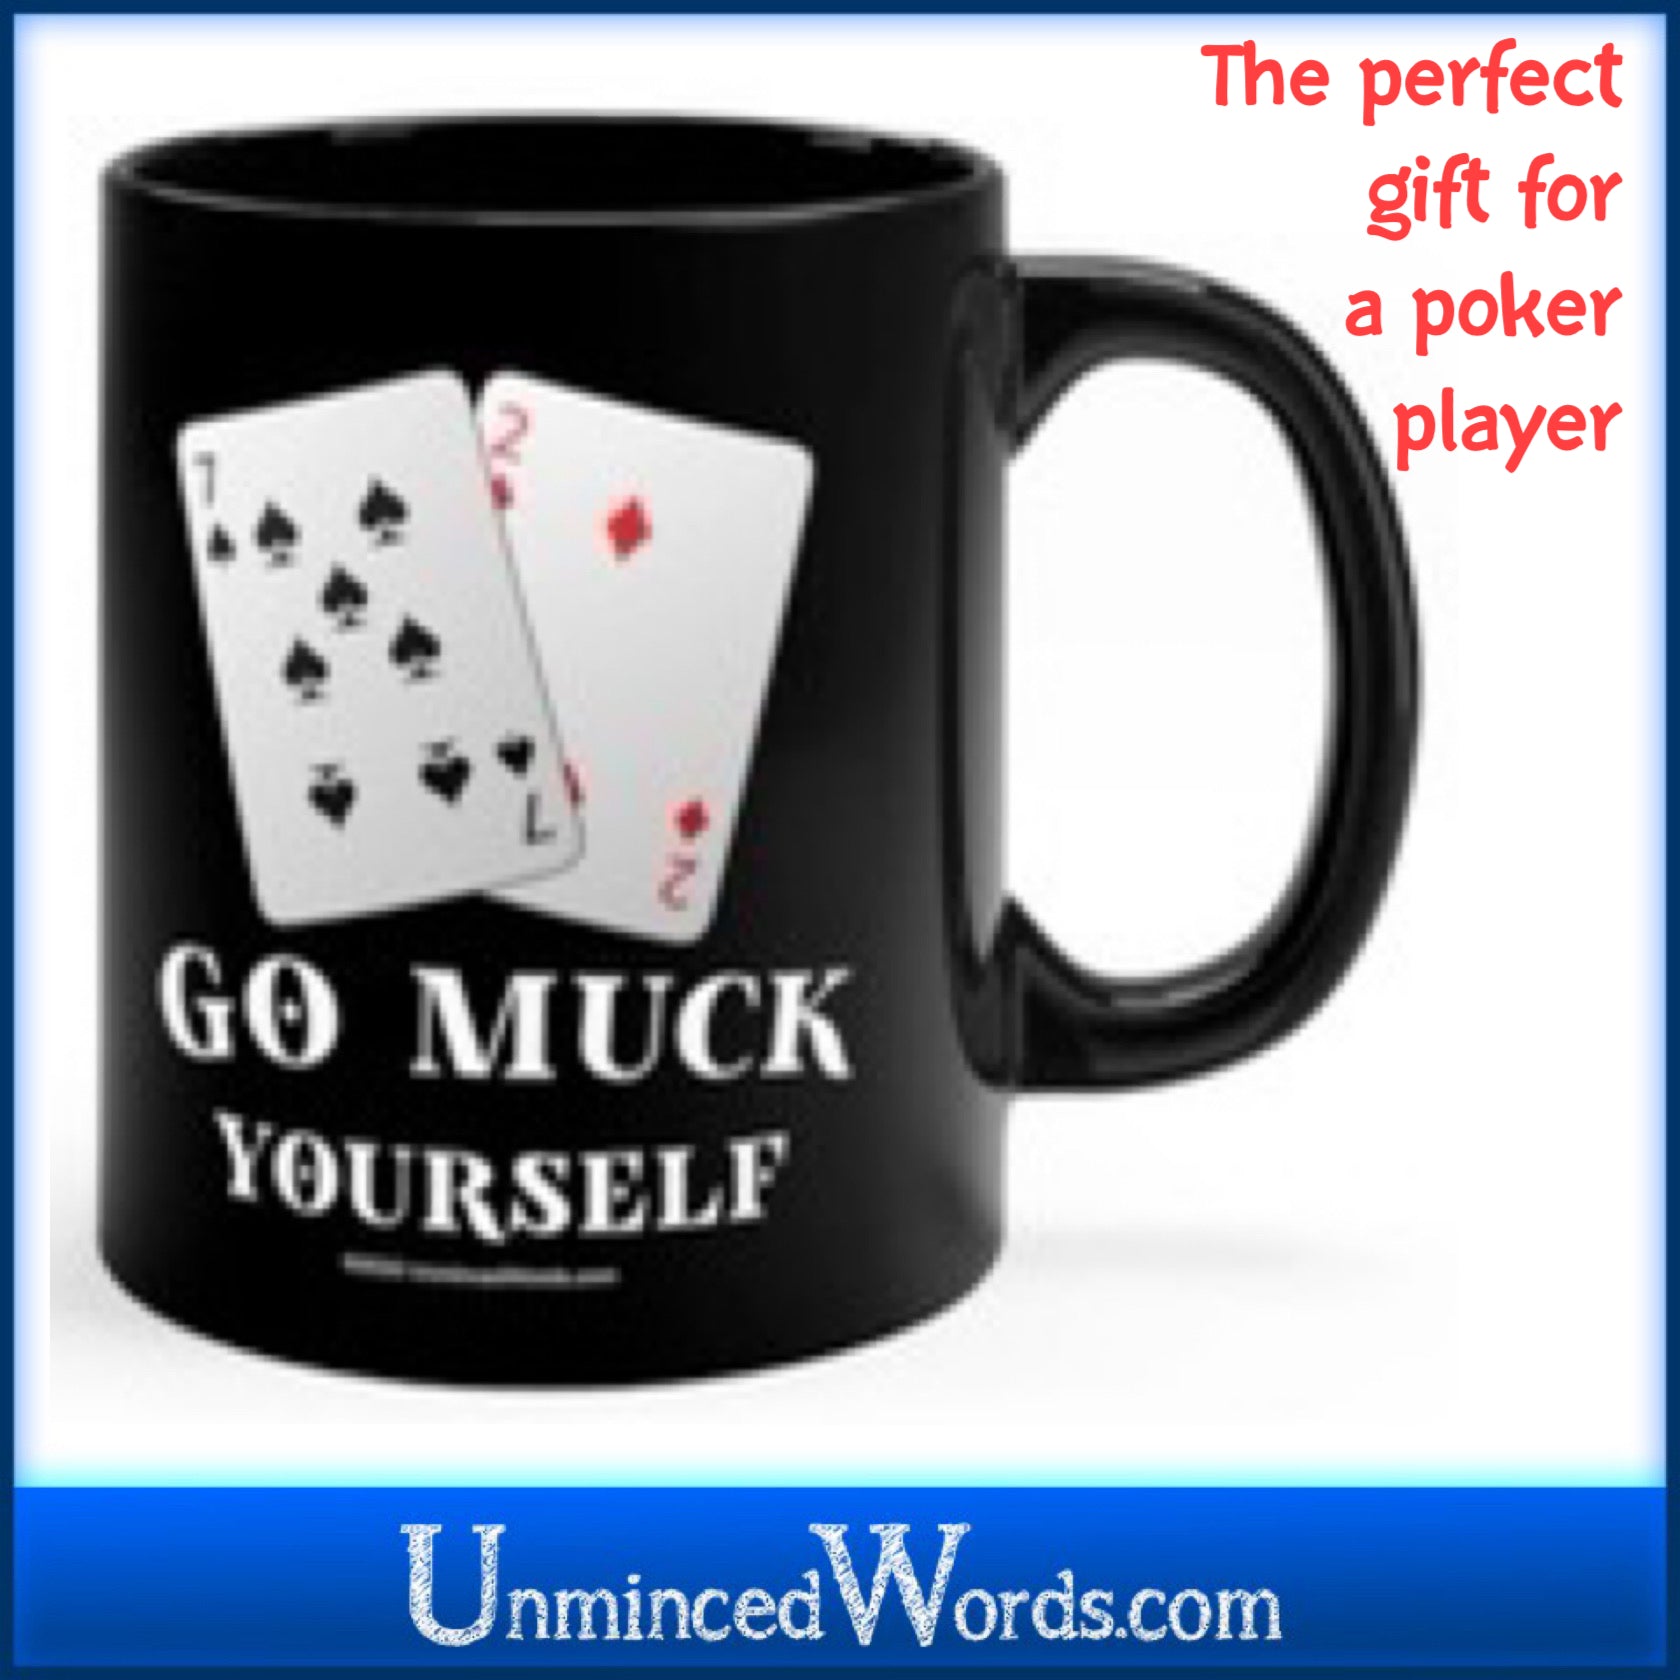 A perfect gift for a poker player